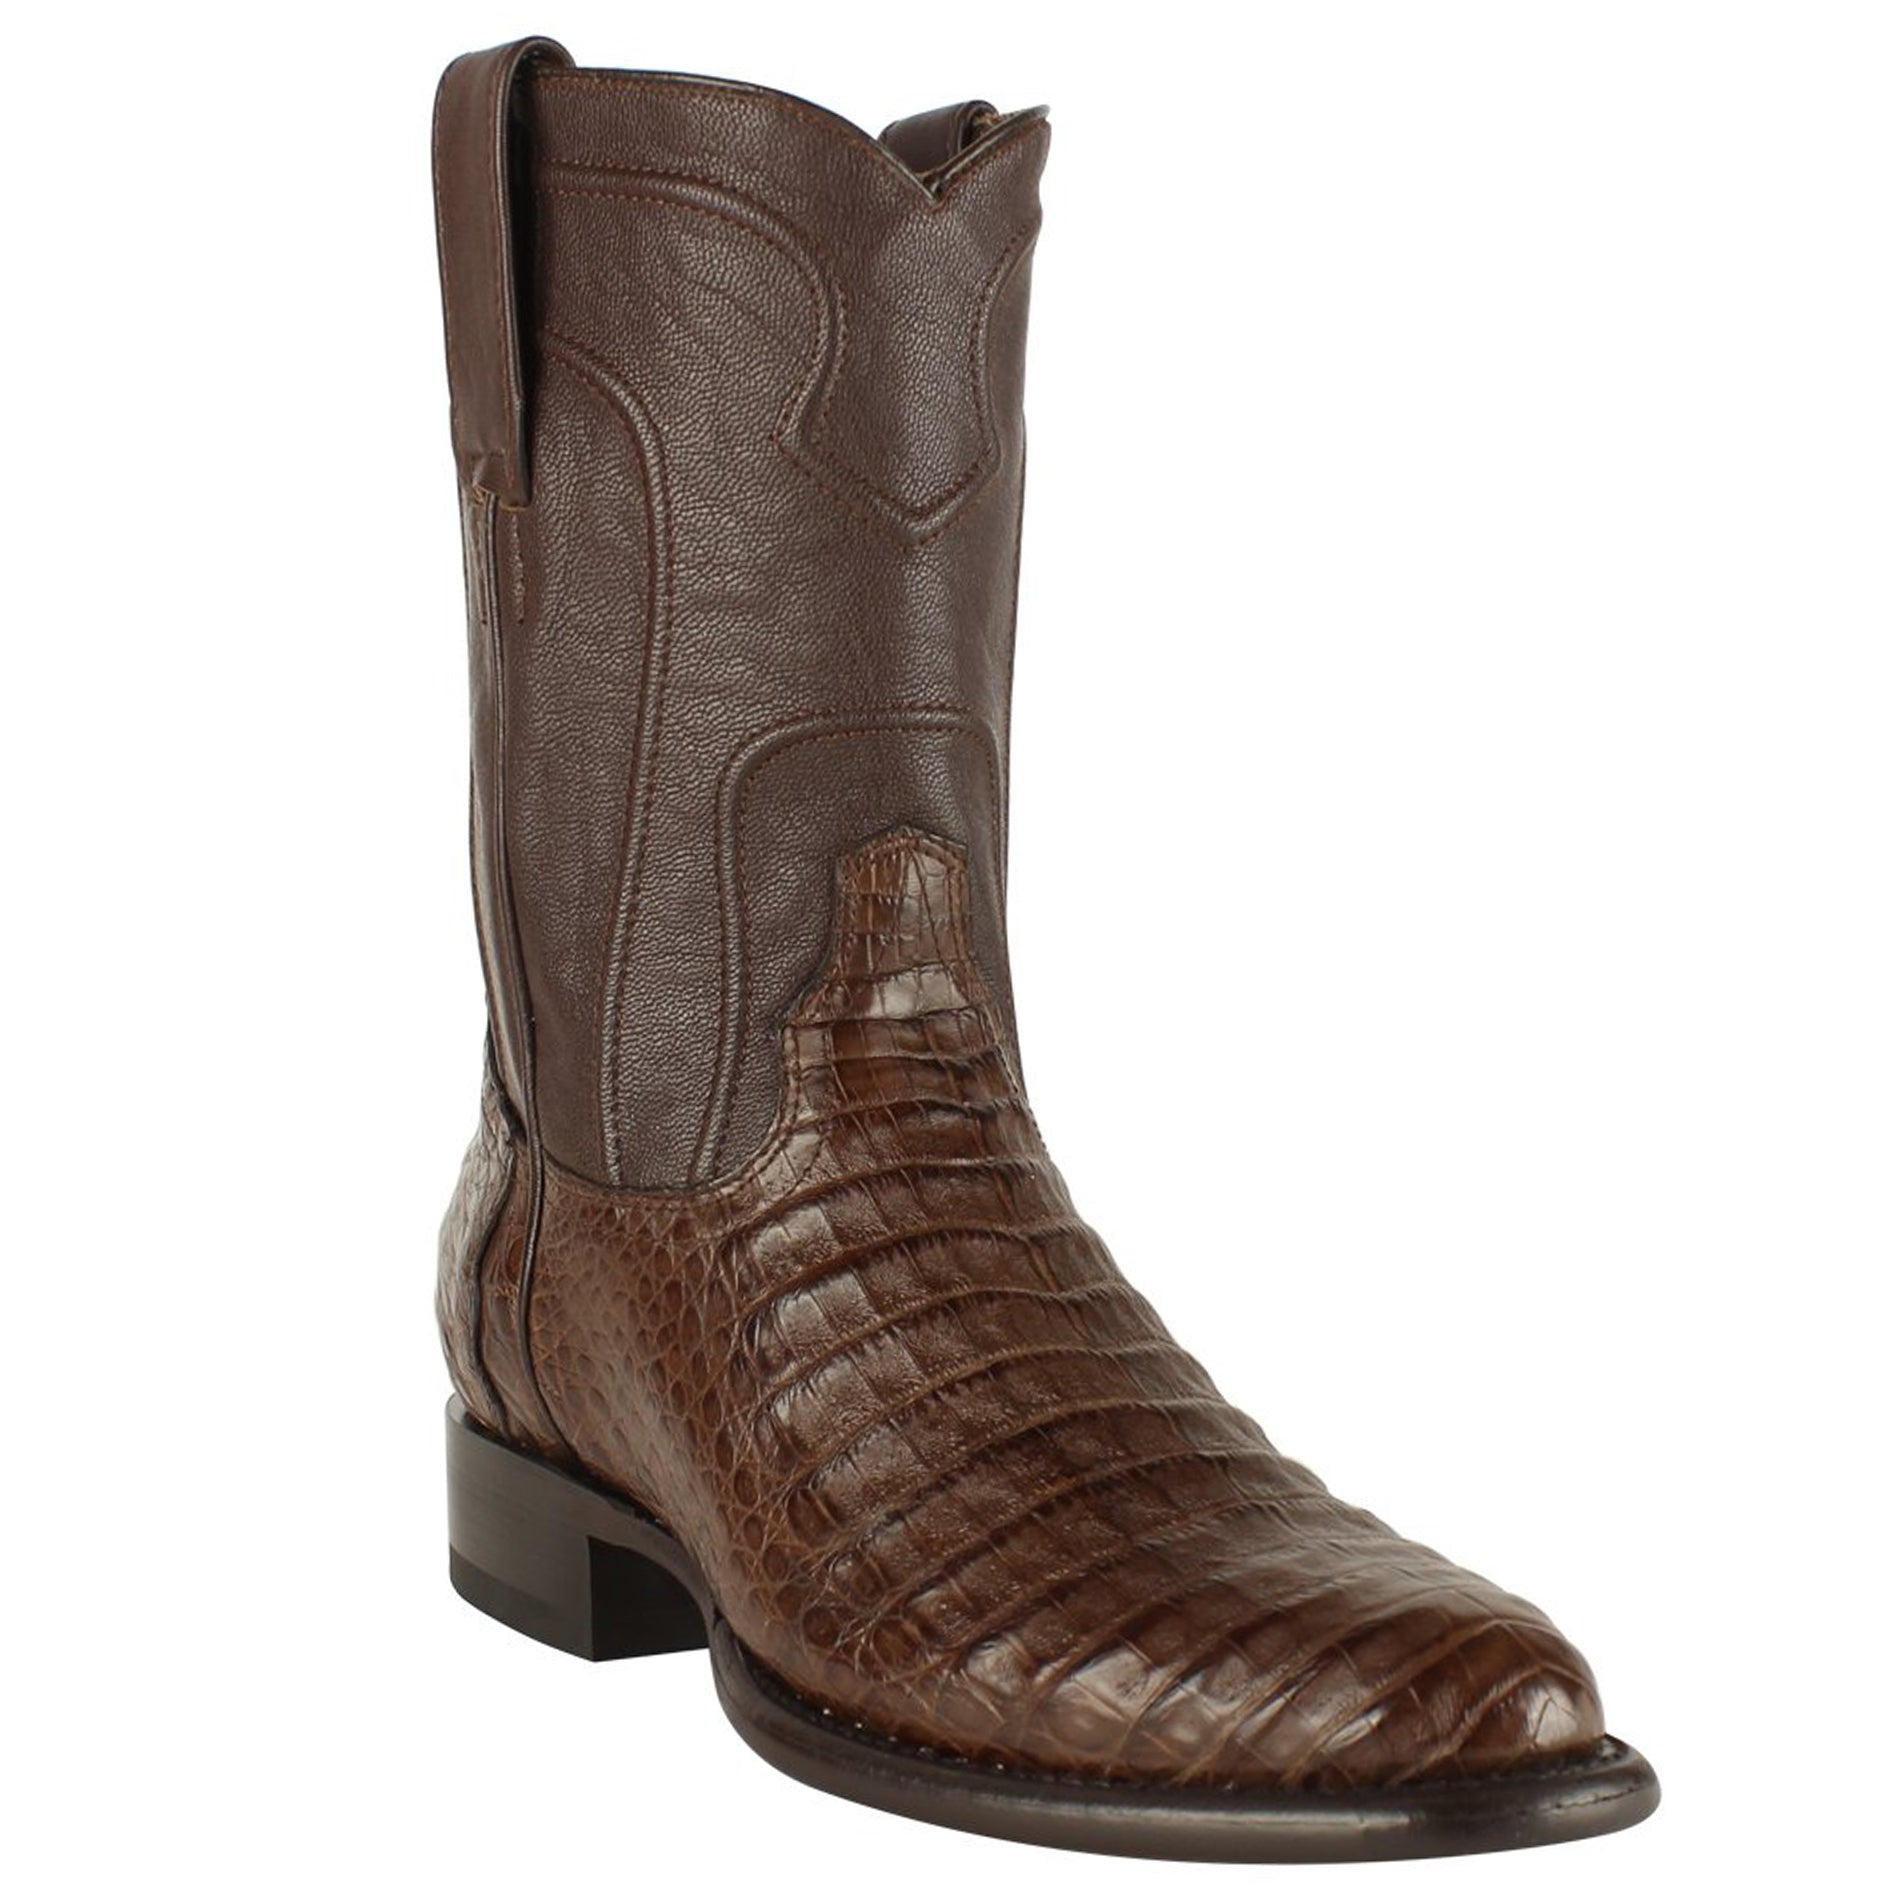 Brown caiman roper boots